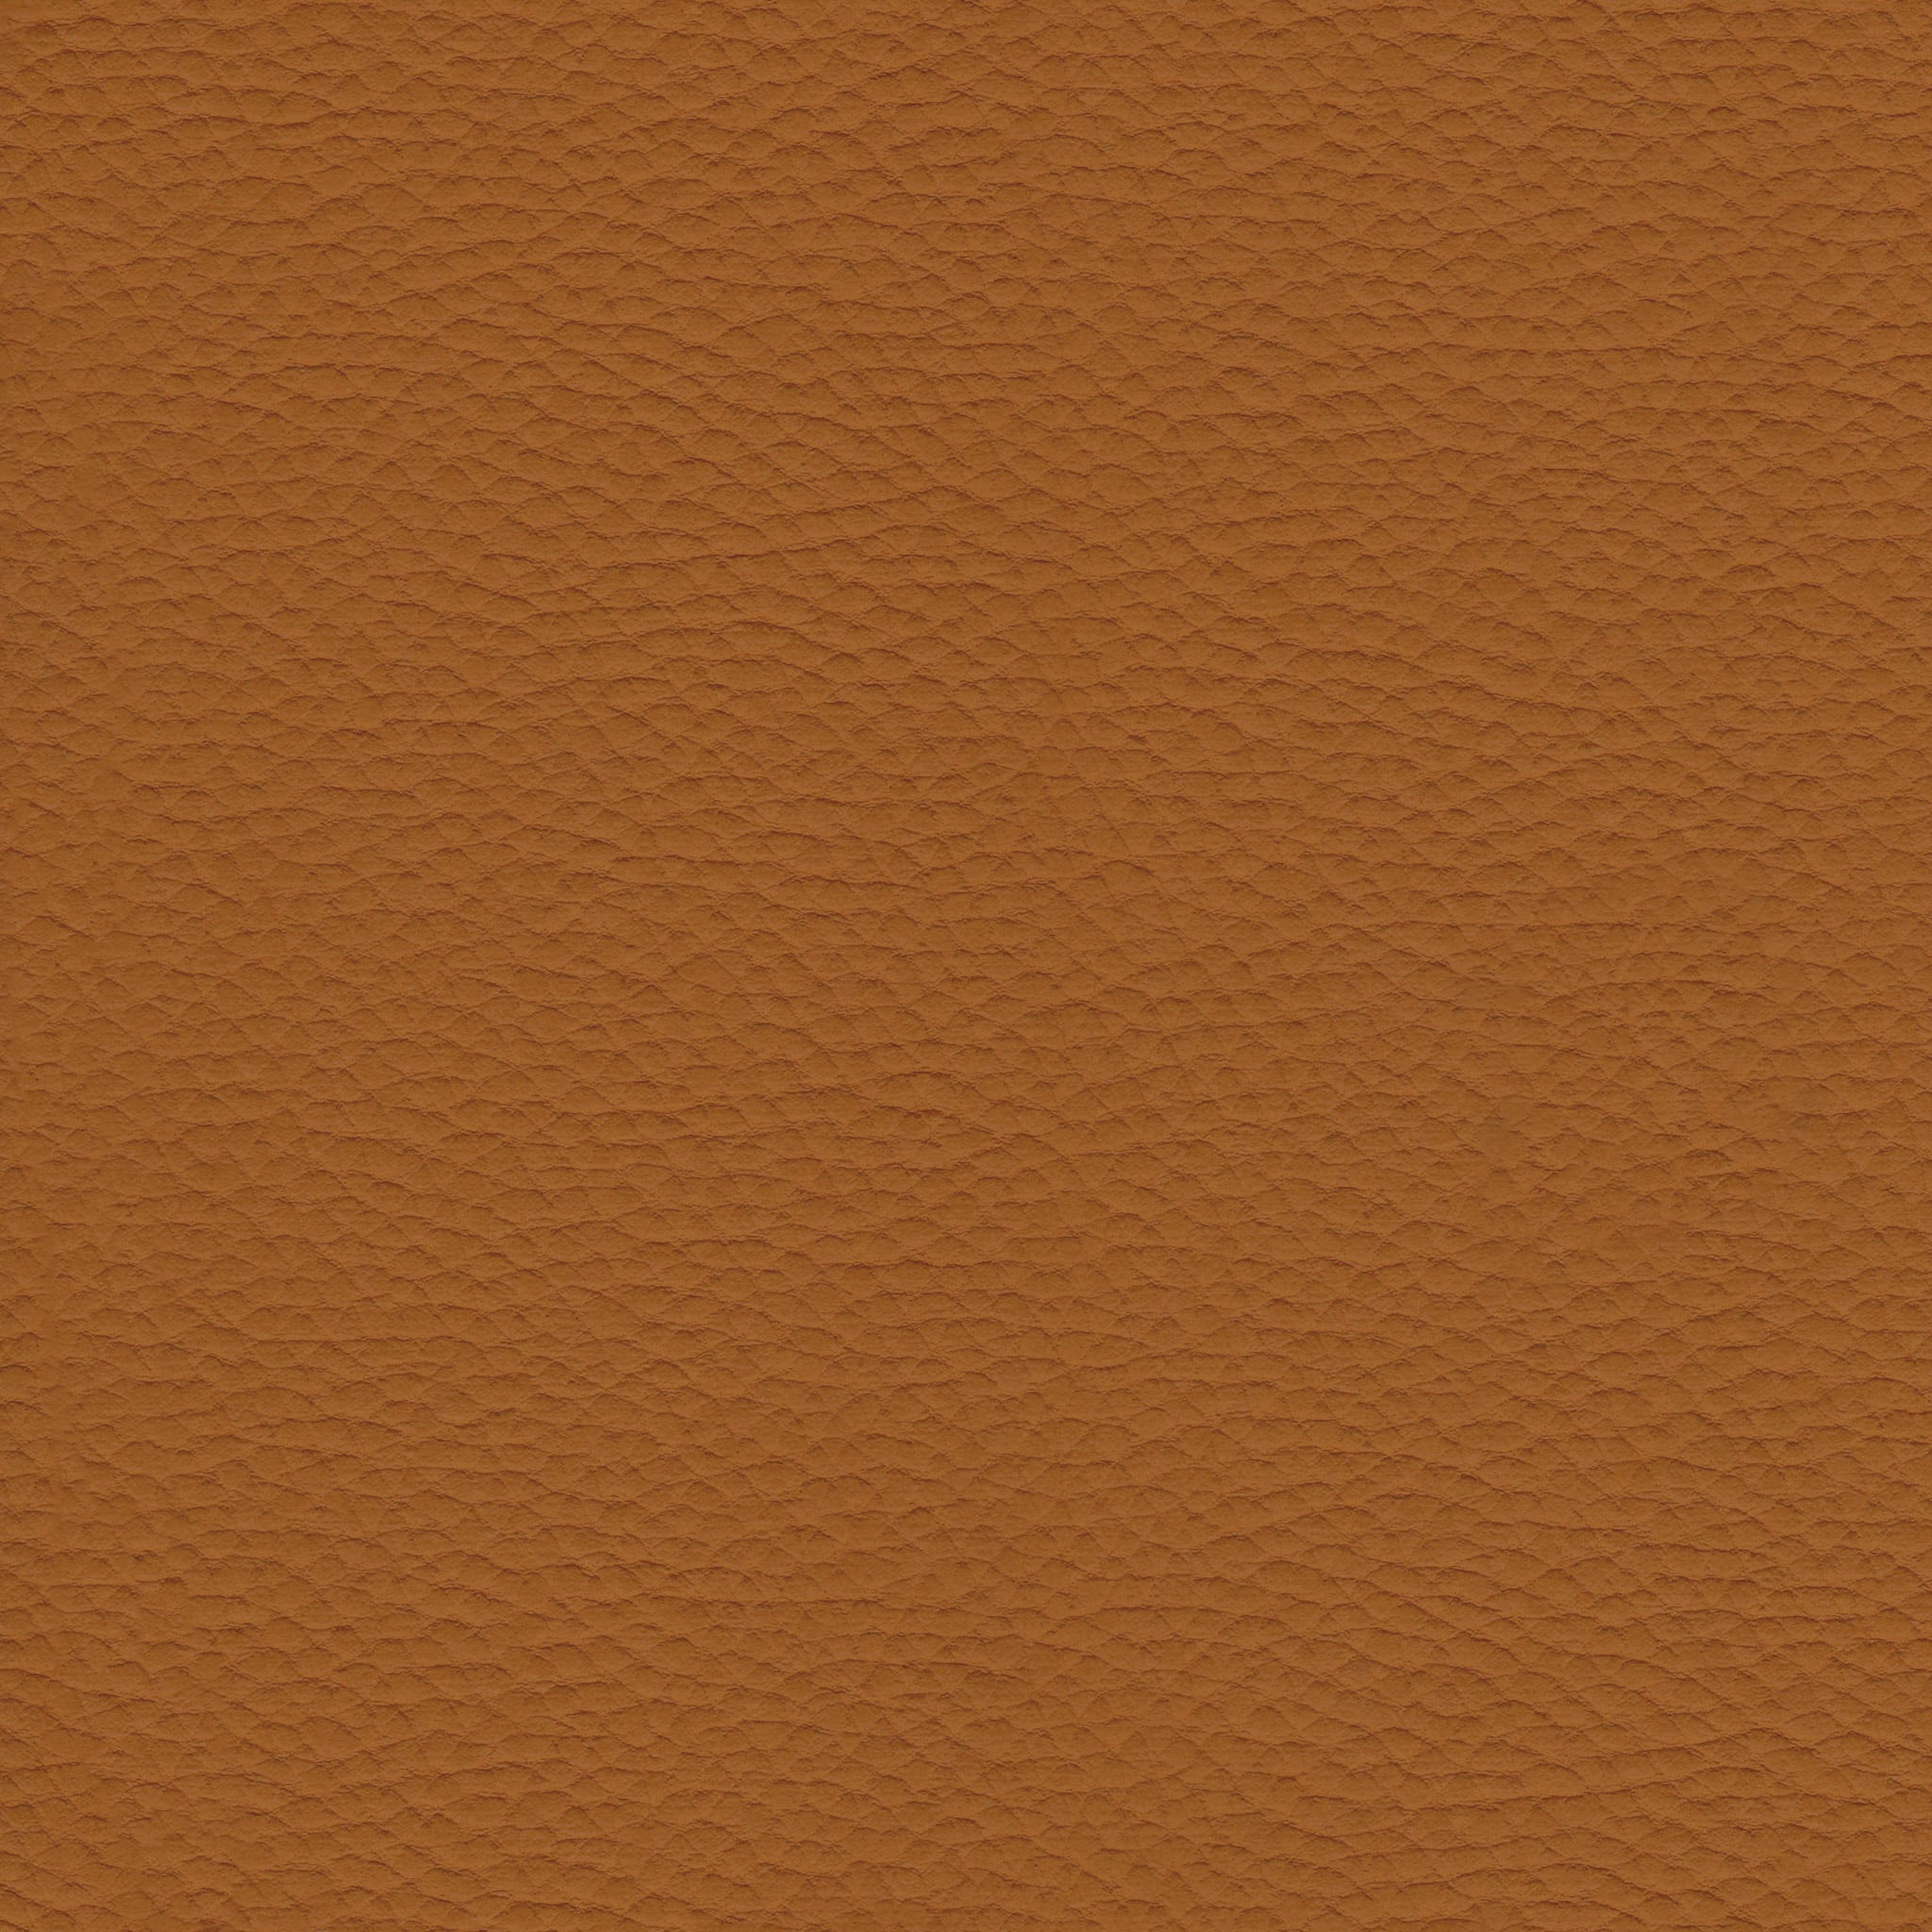 Caramel Brown Leather 1